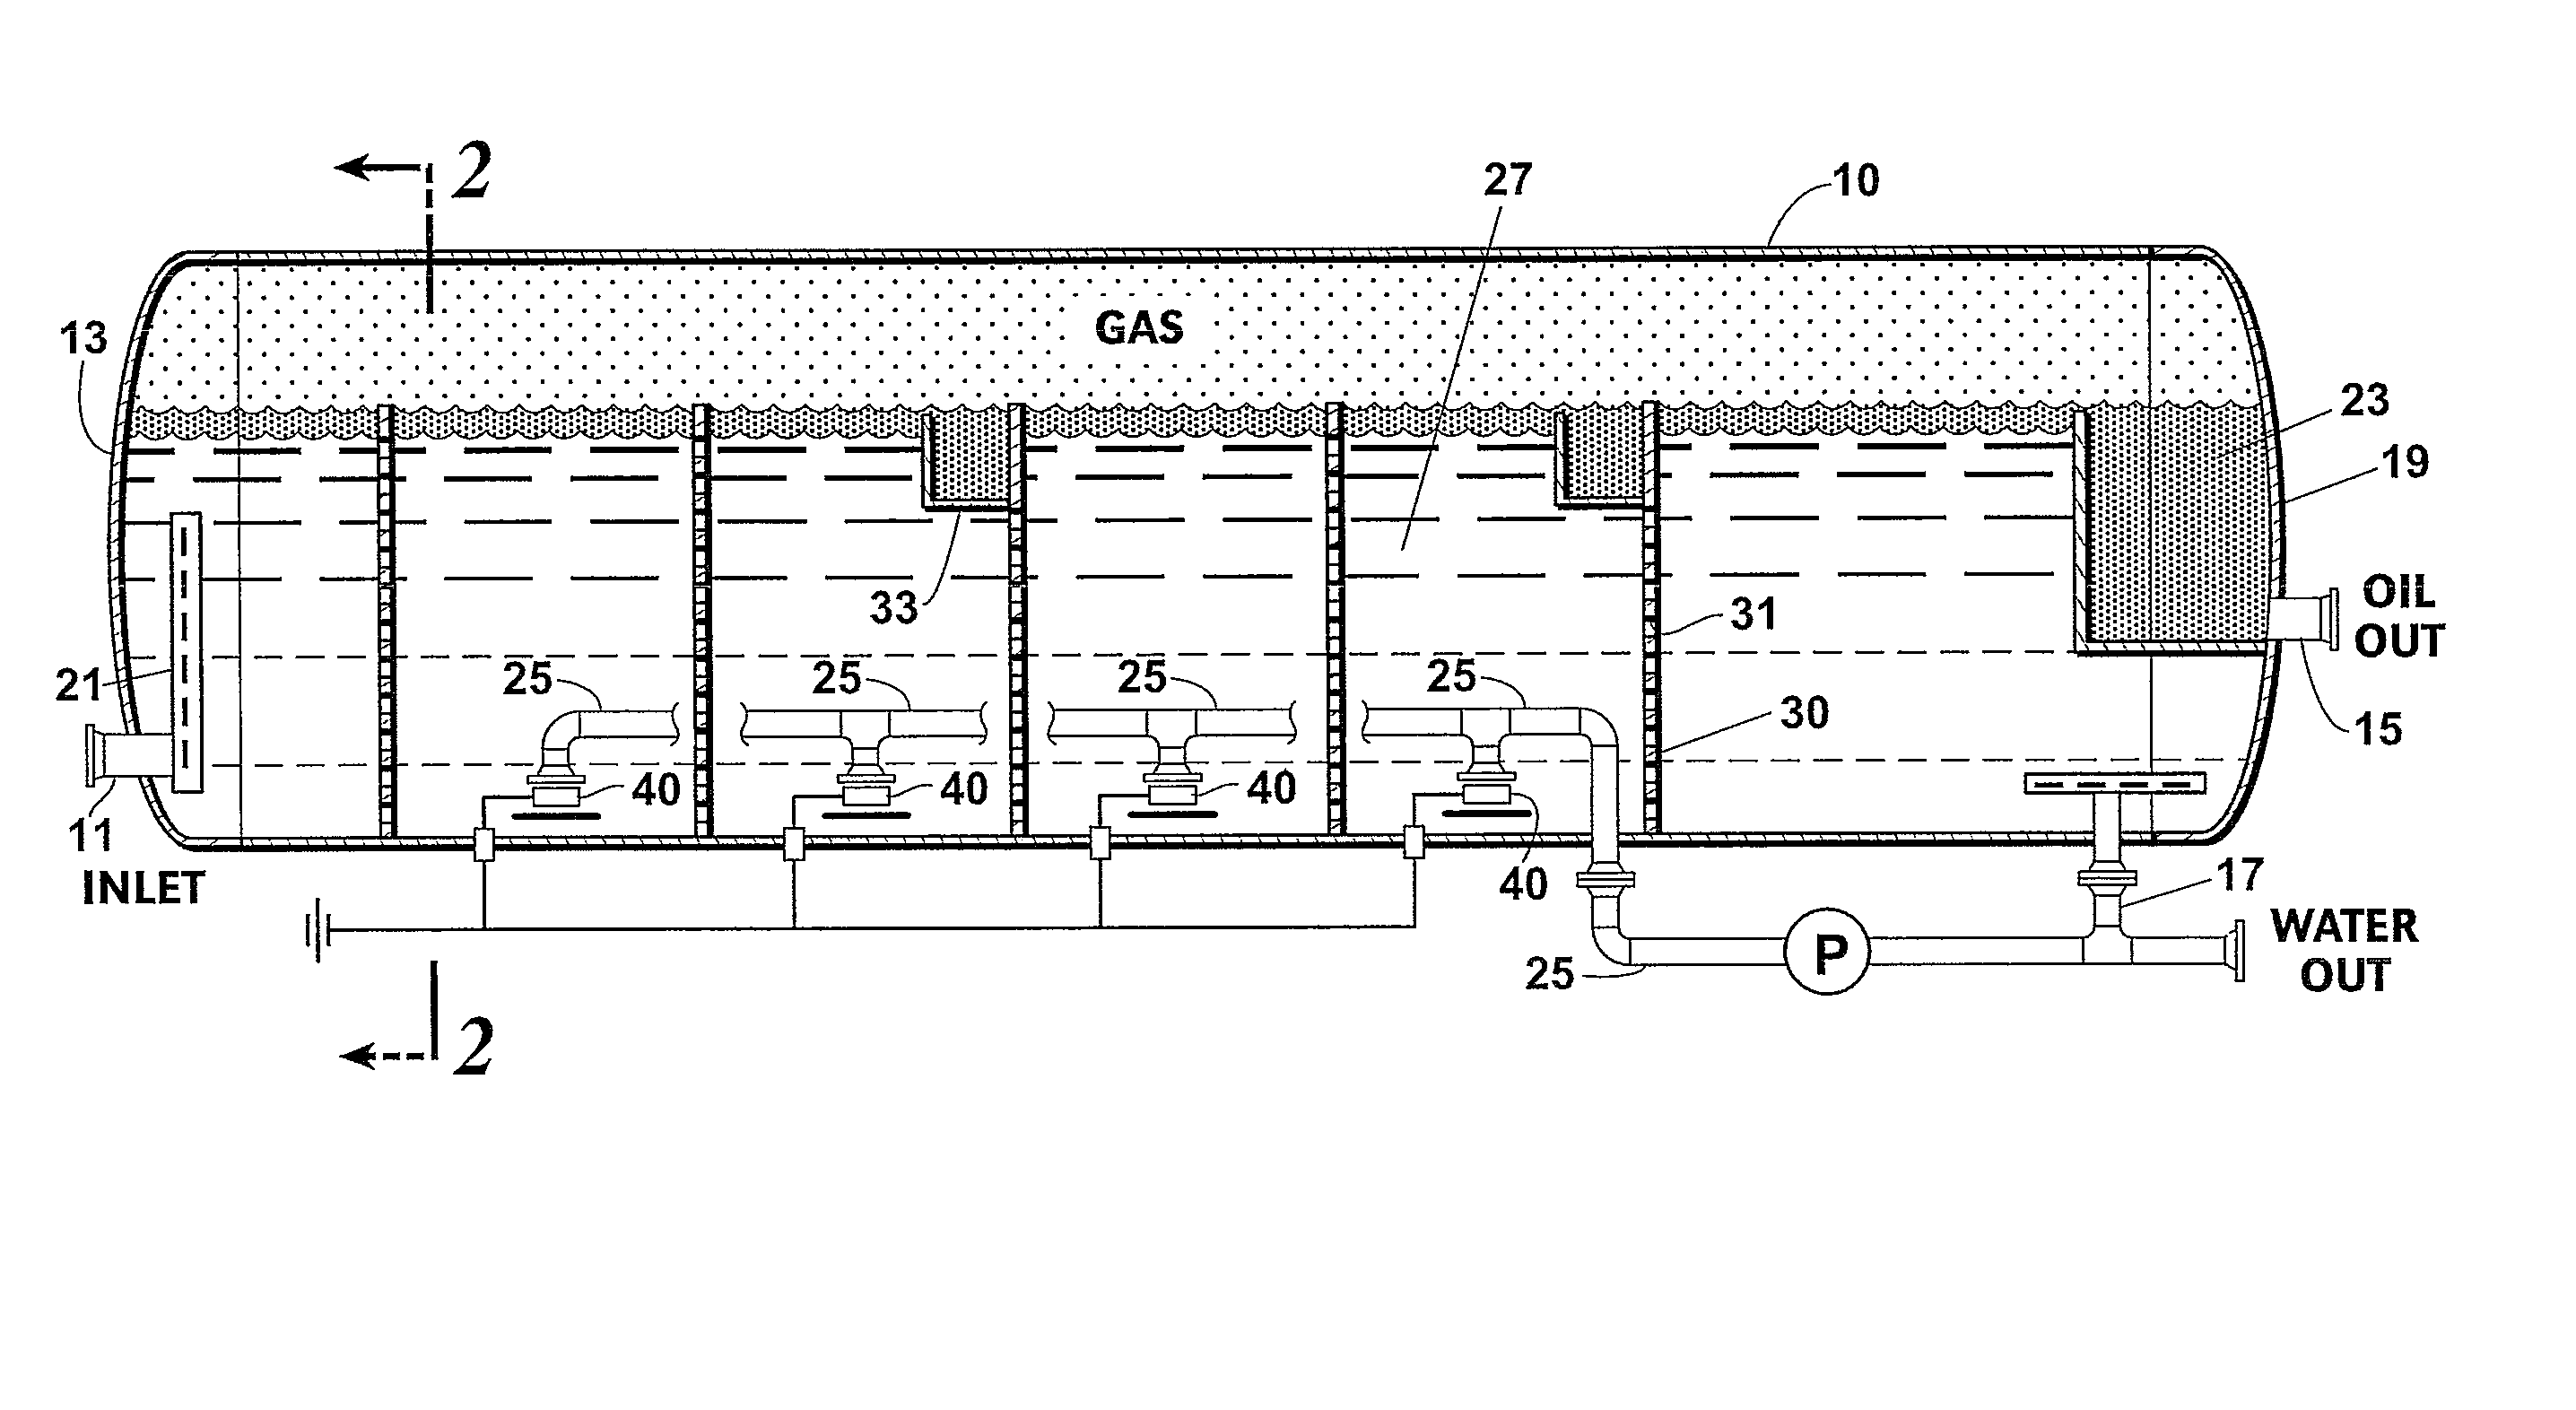 Induced-Gas Flotation Cell with Horizontal Flow